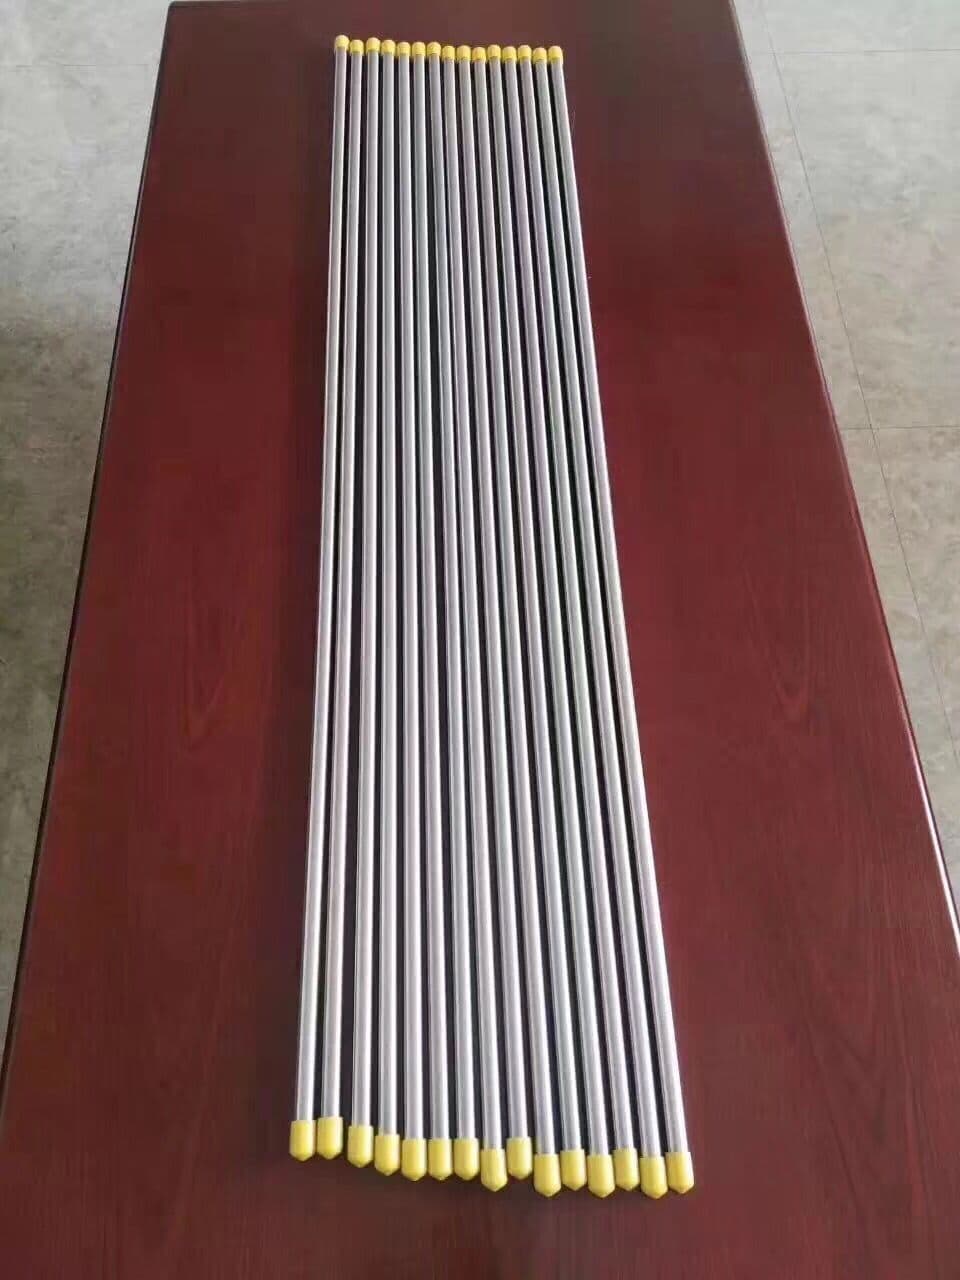 ASTM B407 UNS N08810 nickel alloy seamless pipe tube